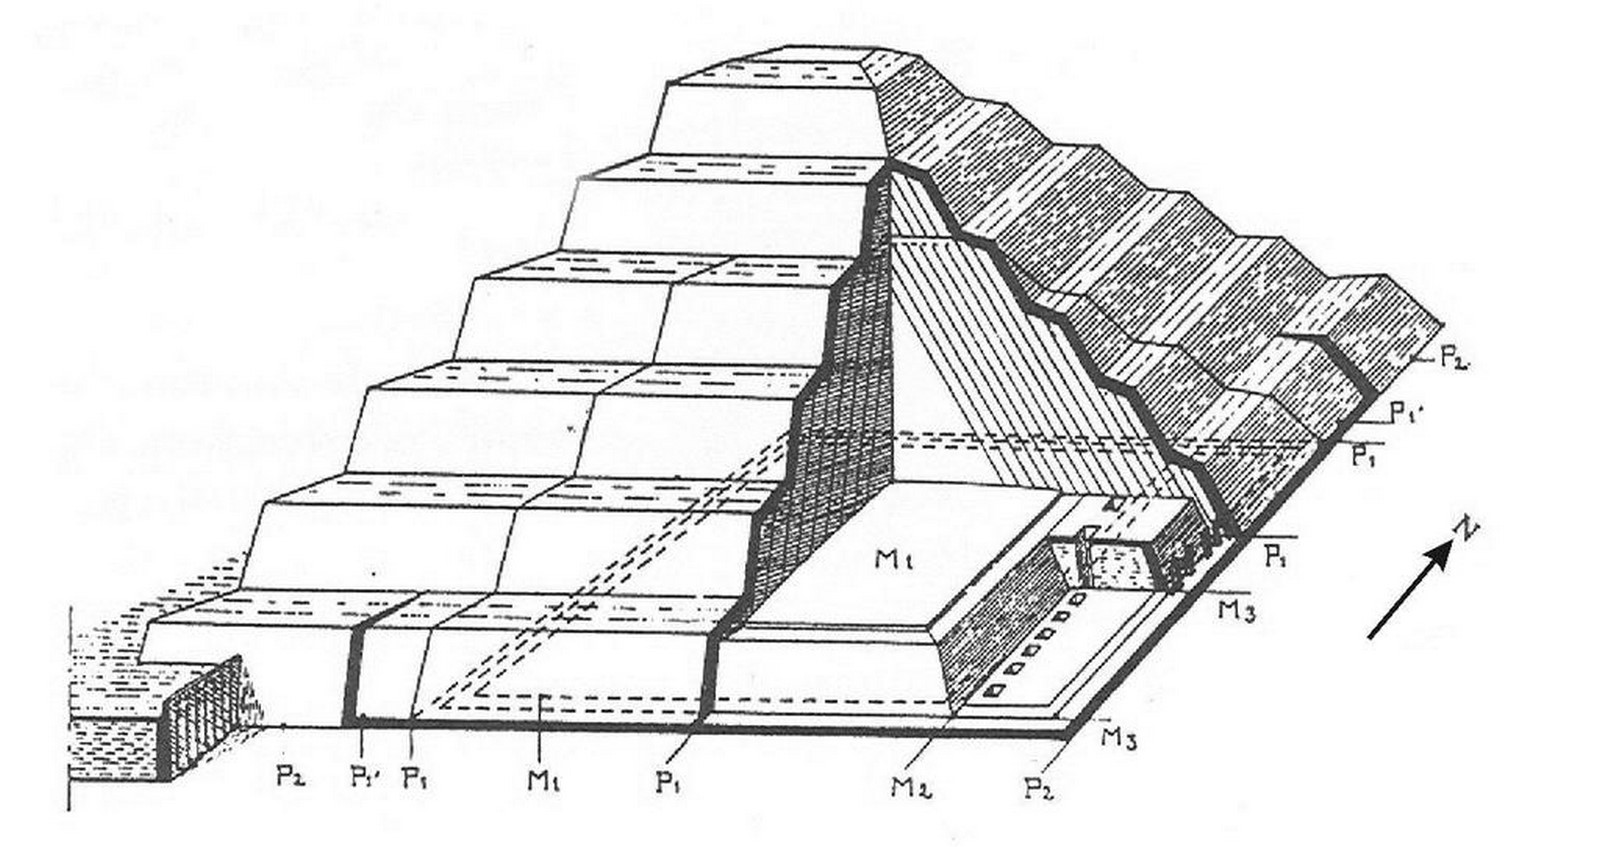 ancient egypt architecture drawing